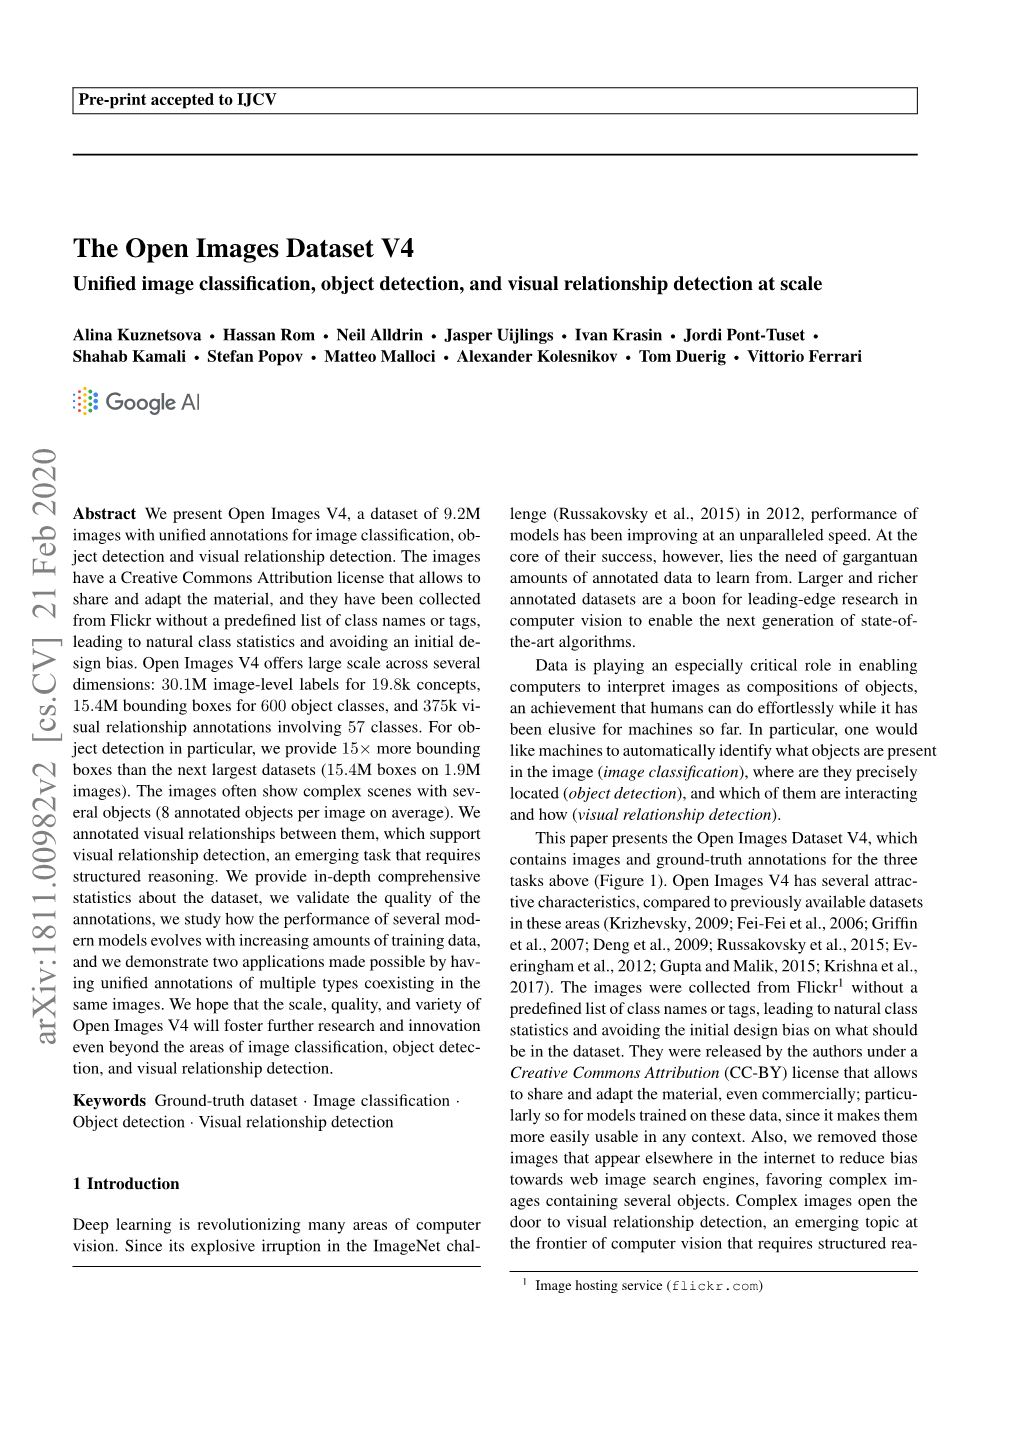 The Open Images Dataset V4 Uniﬁed Image Classiﬁcation, Object Detection, and Visual Relationship Detection at Scale